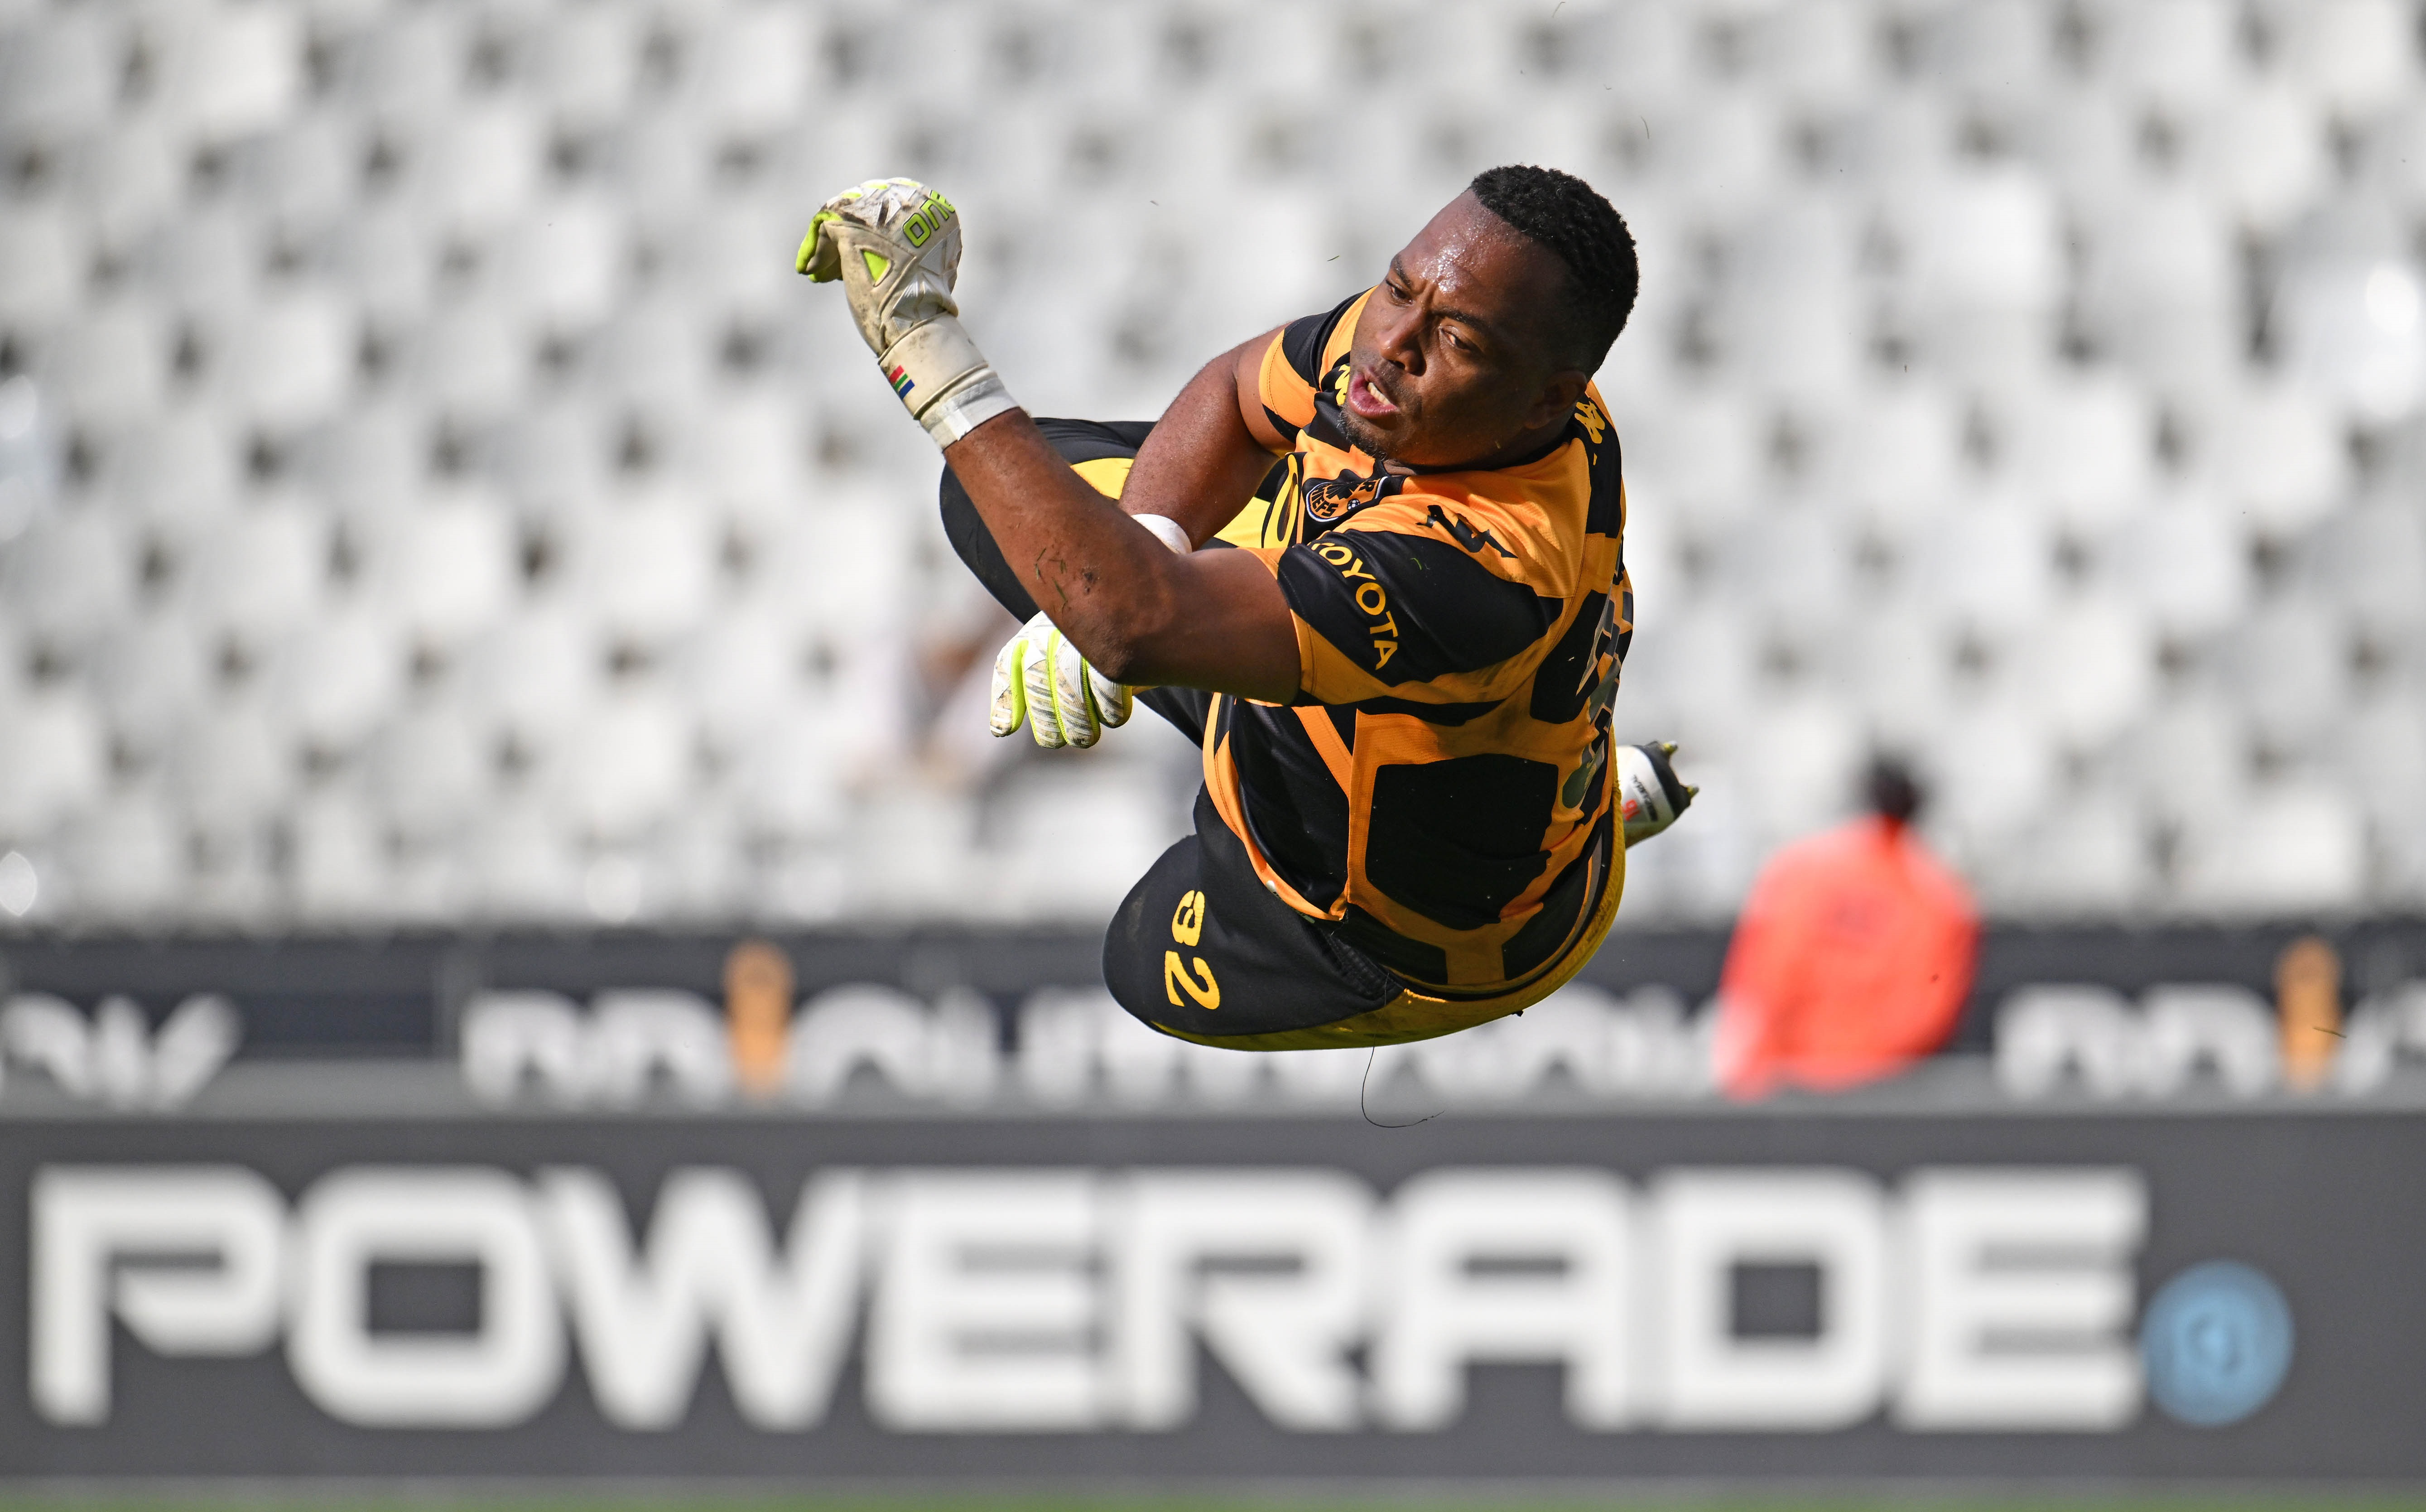 Khune’s Hand Forced?